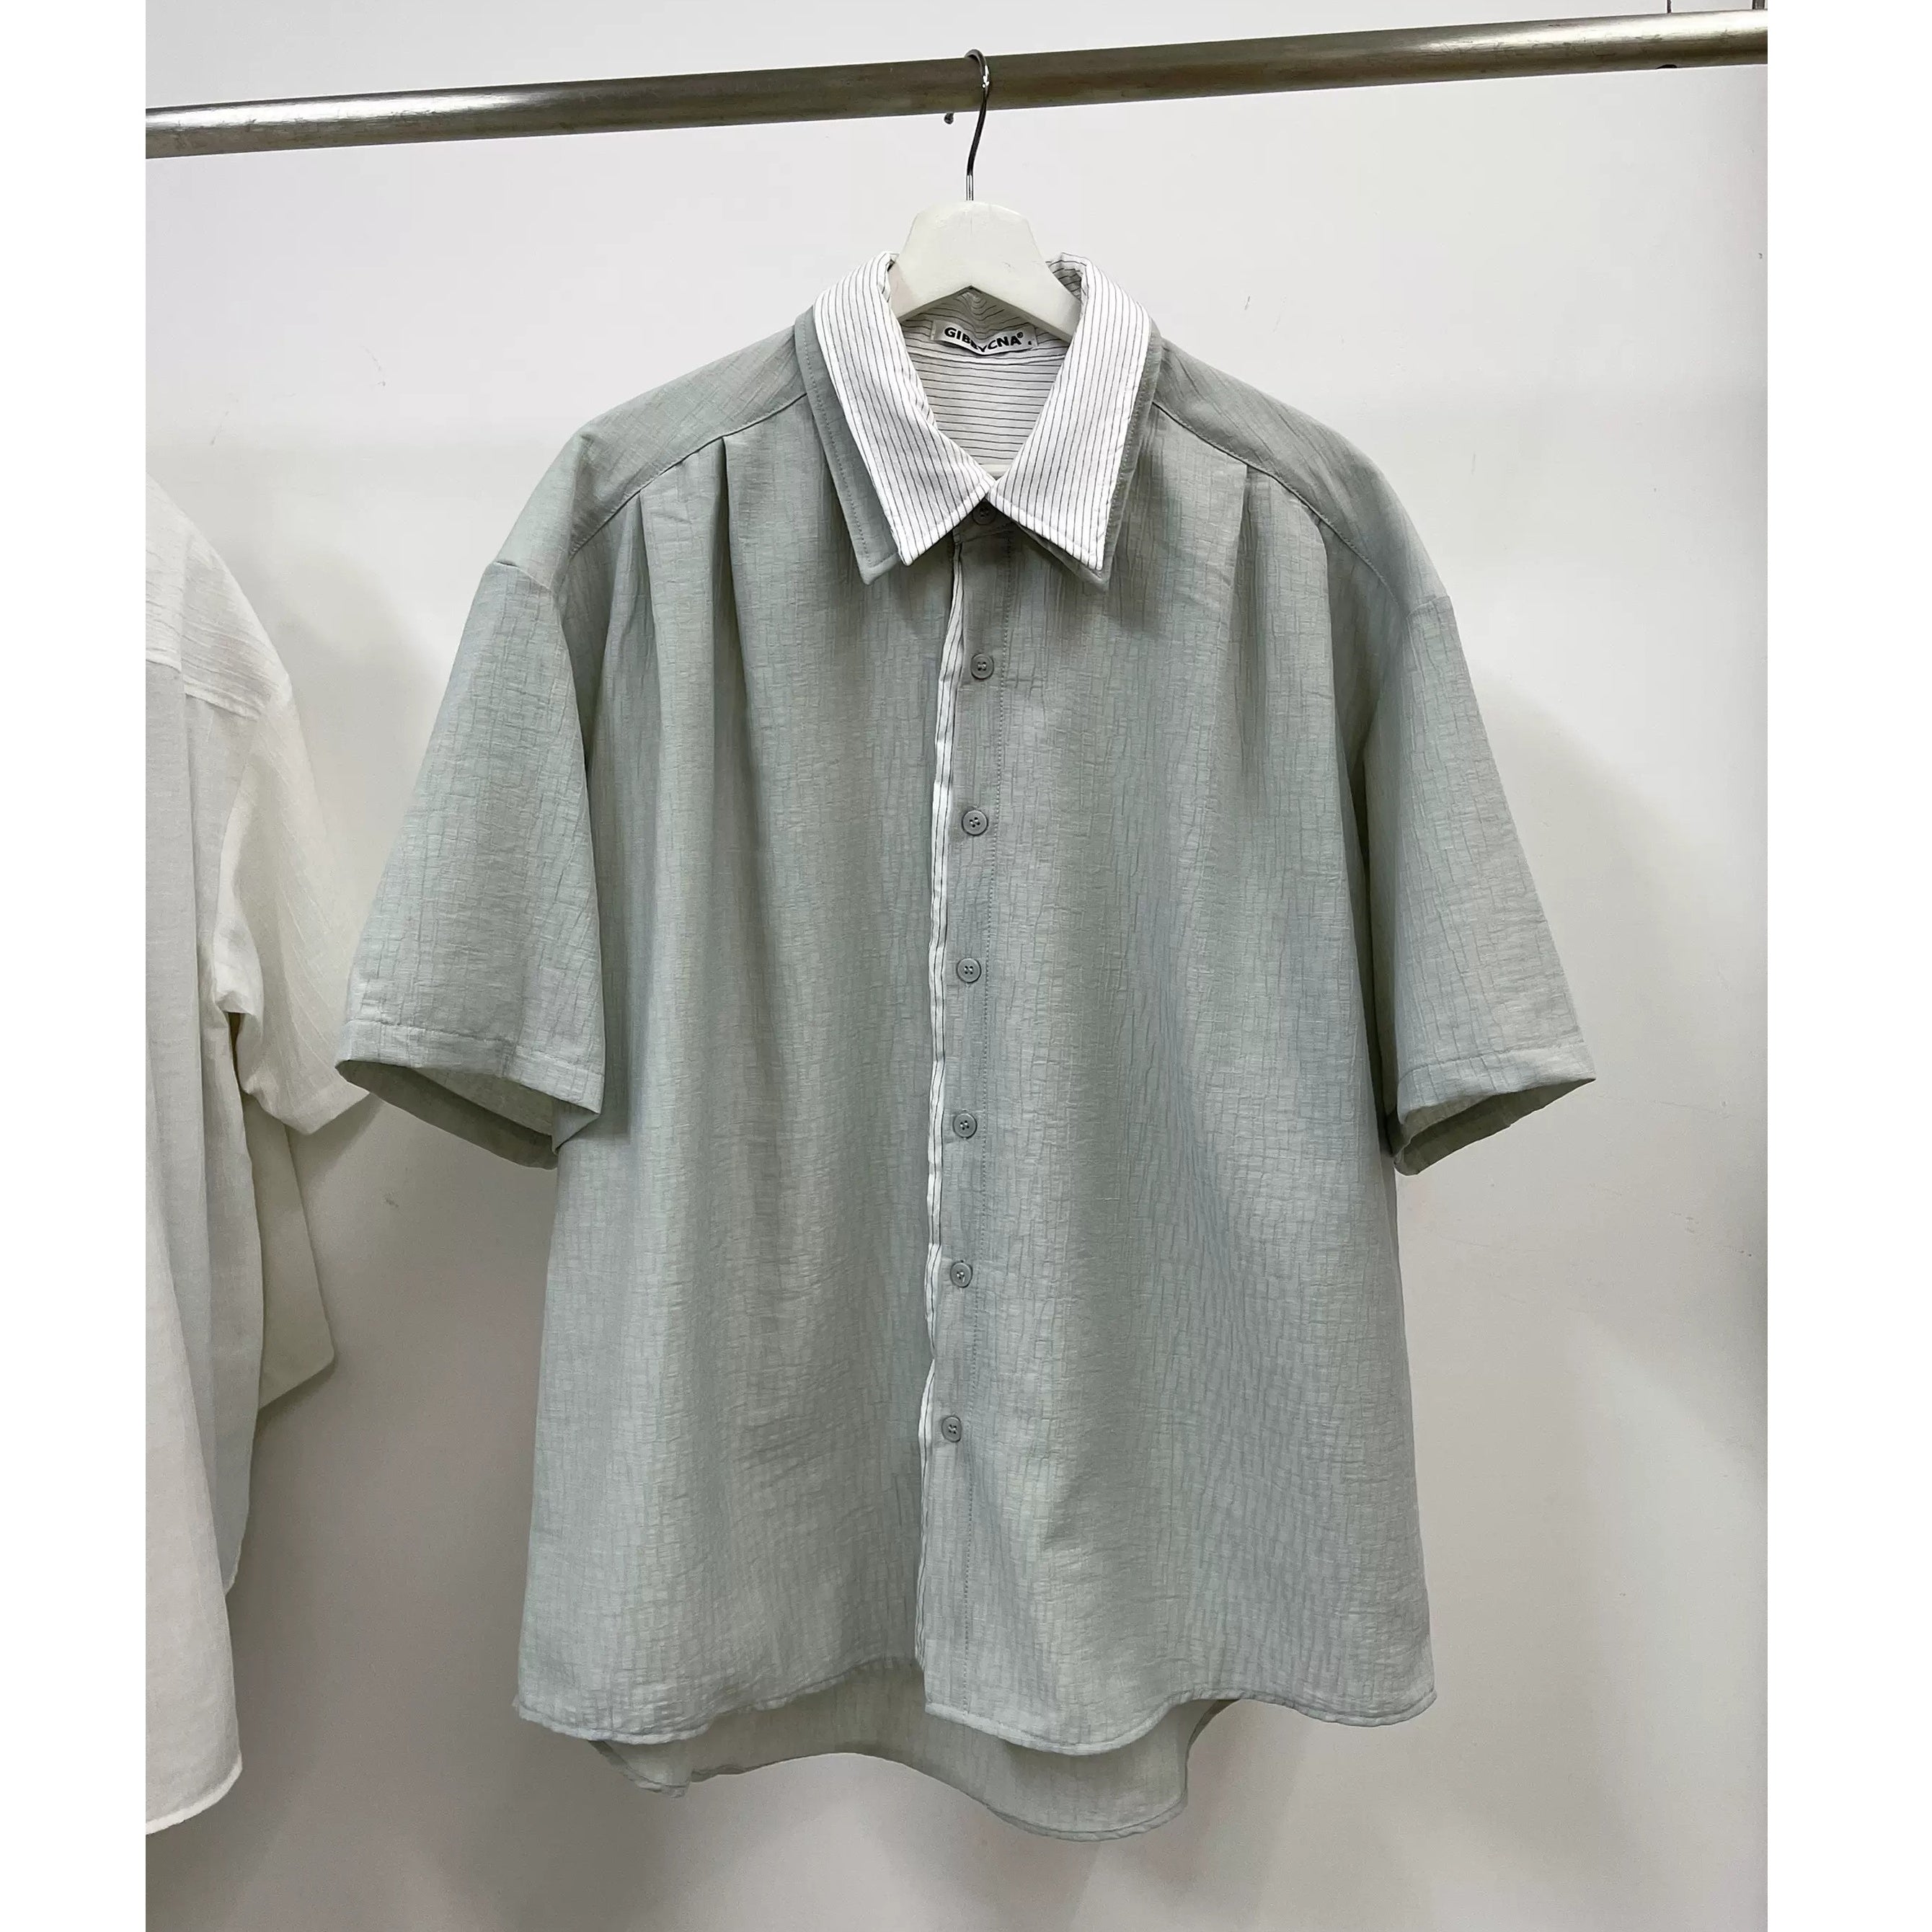 Double Collar Fake Two Short Sleeve Shirt GB7019